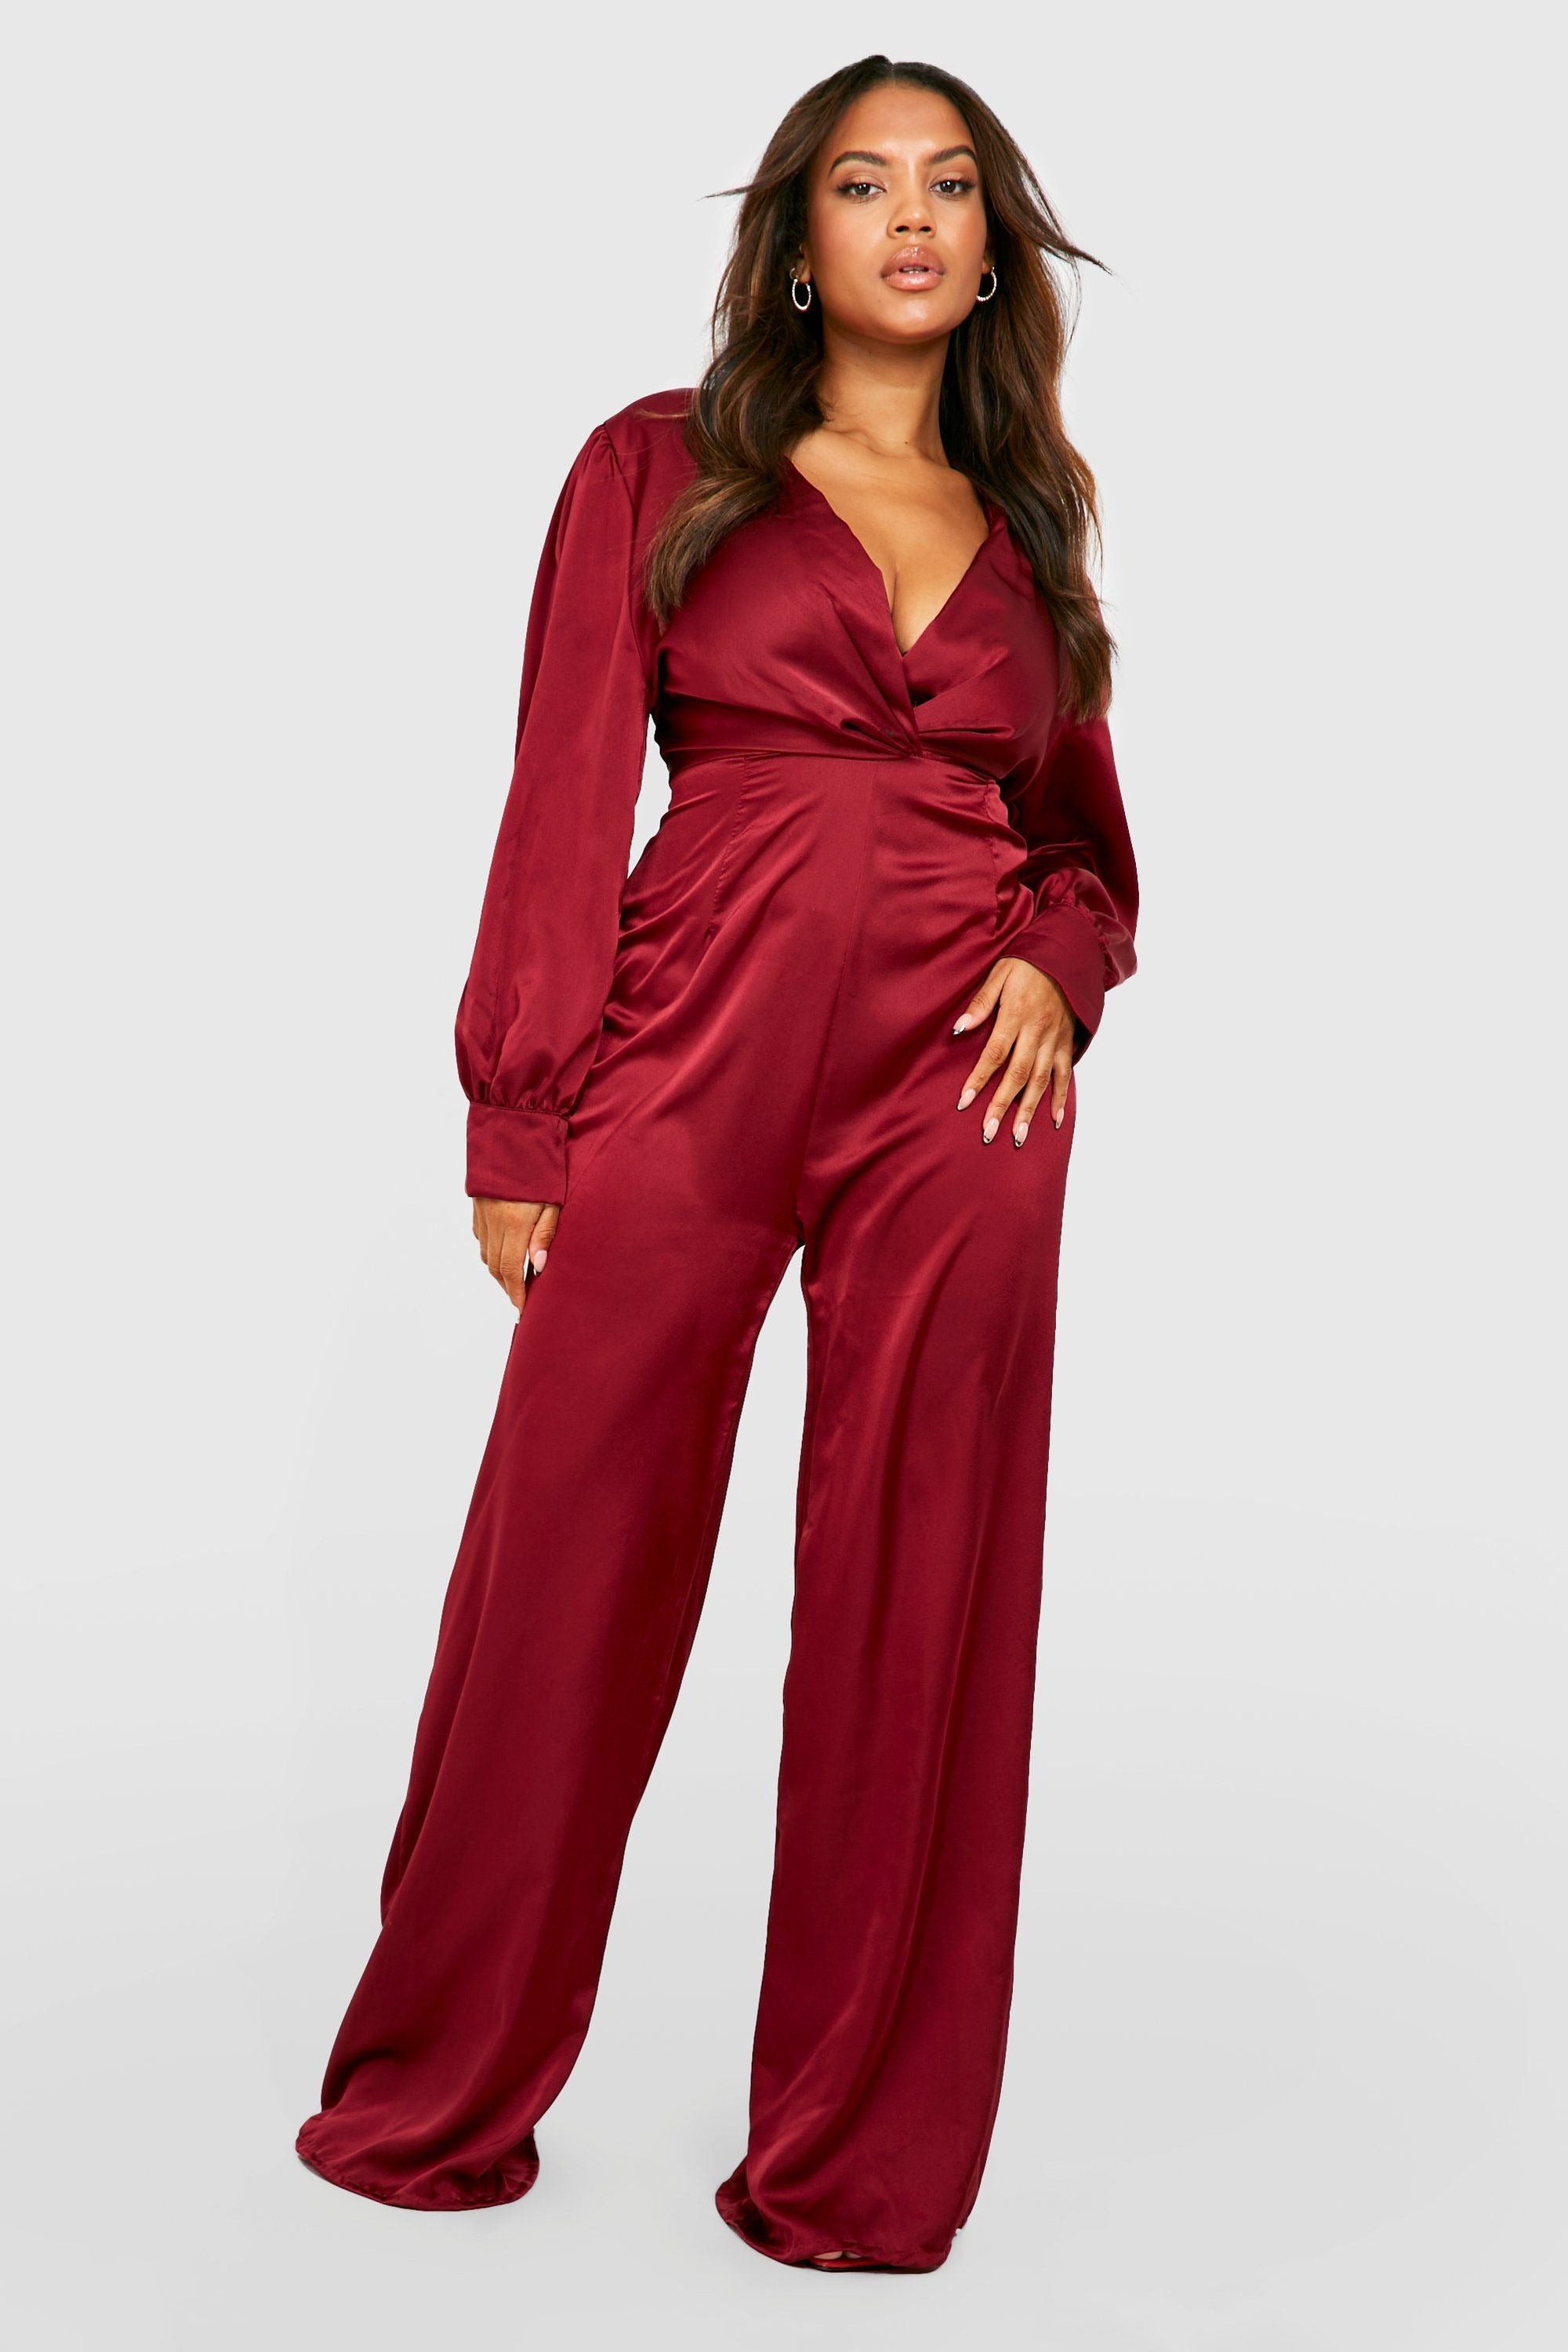 model posing in the red jumpsuit